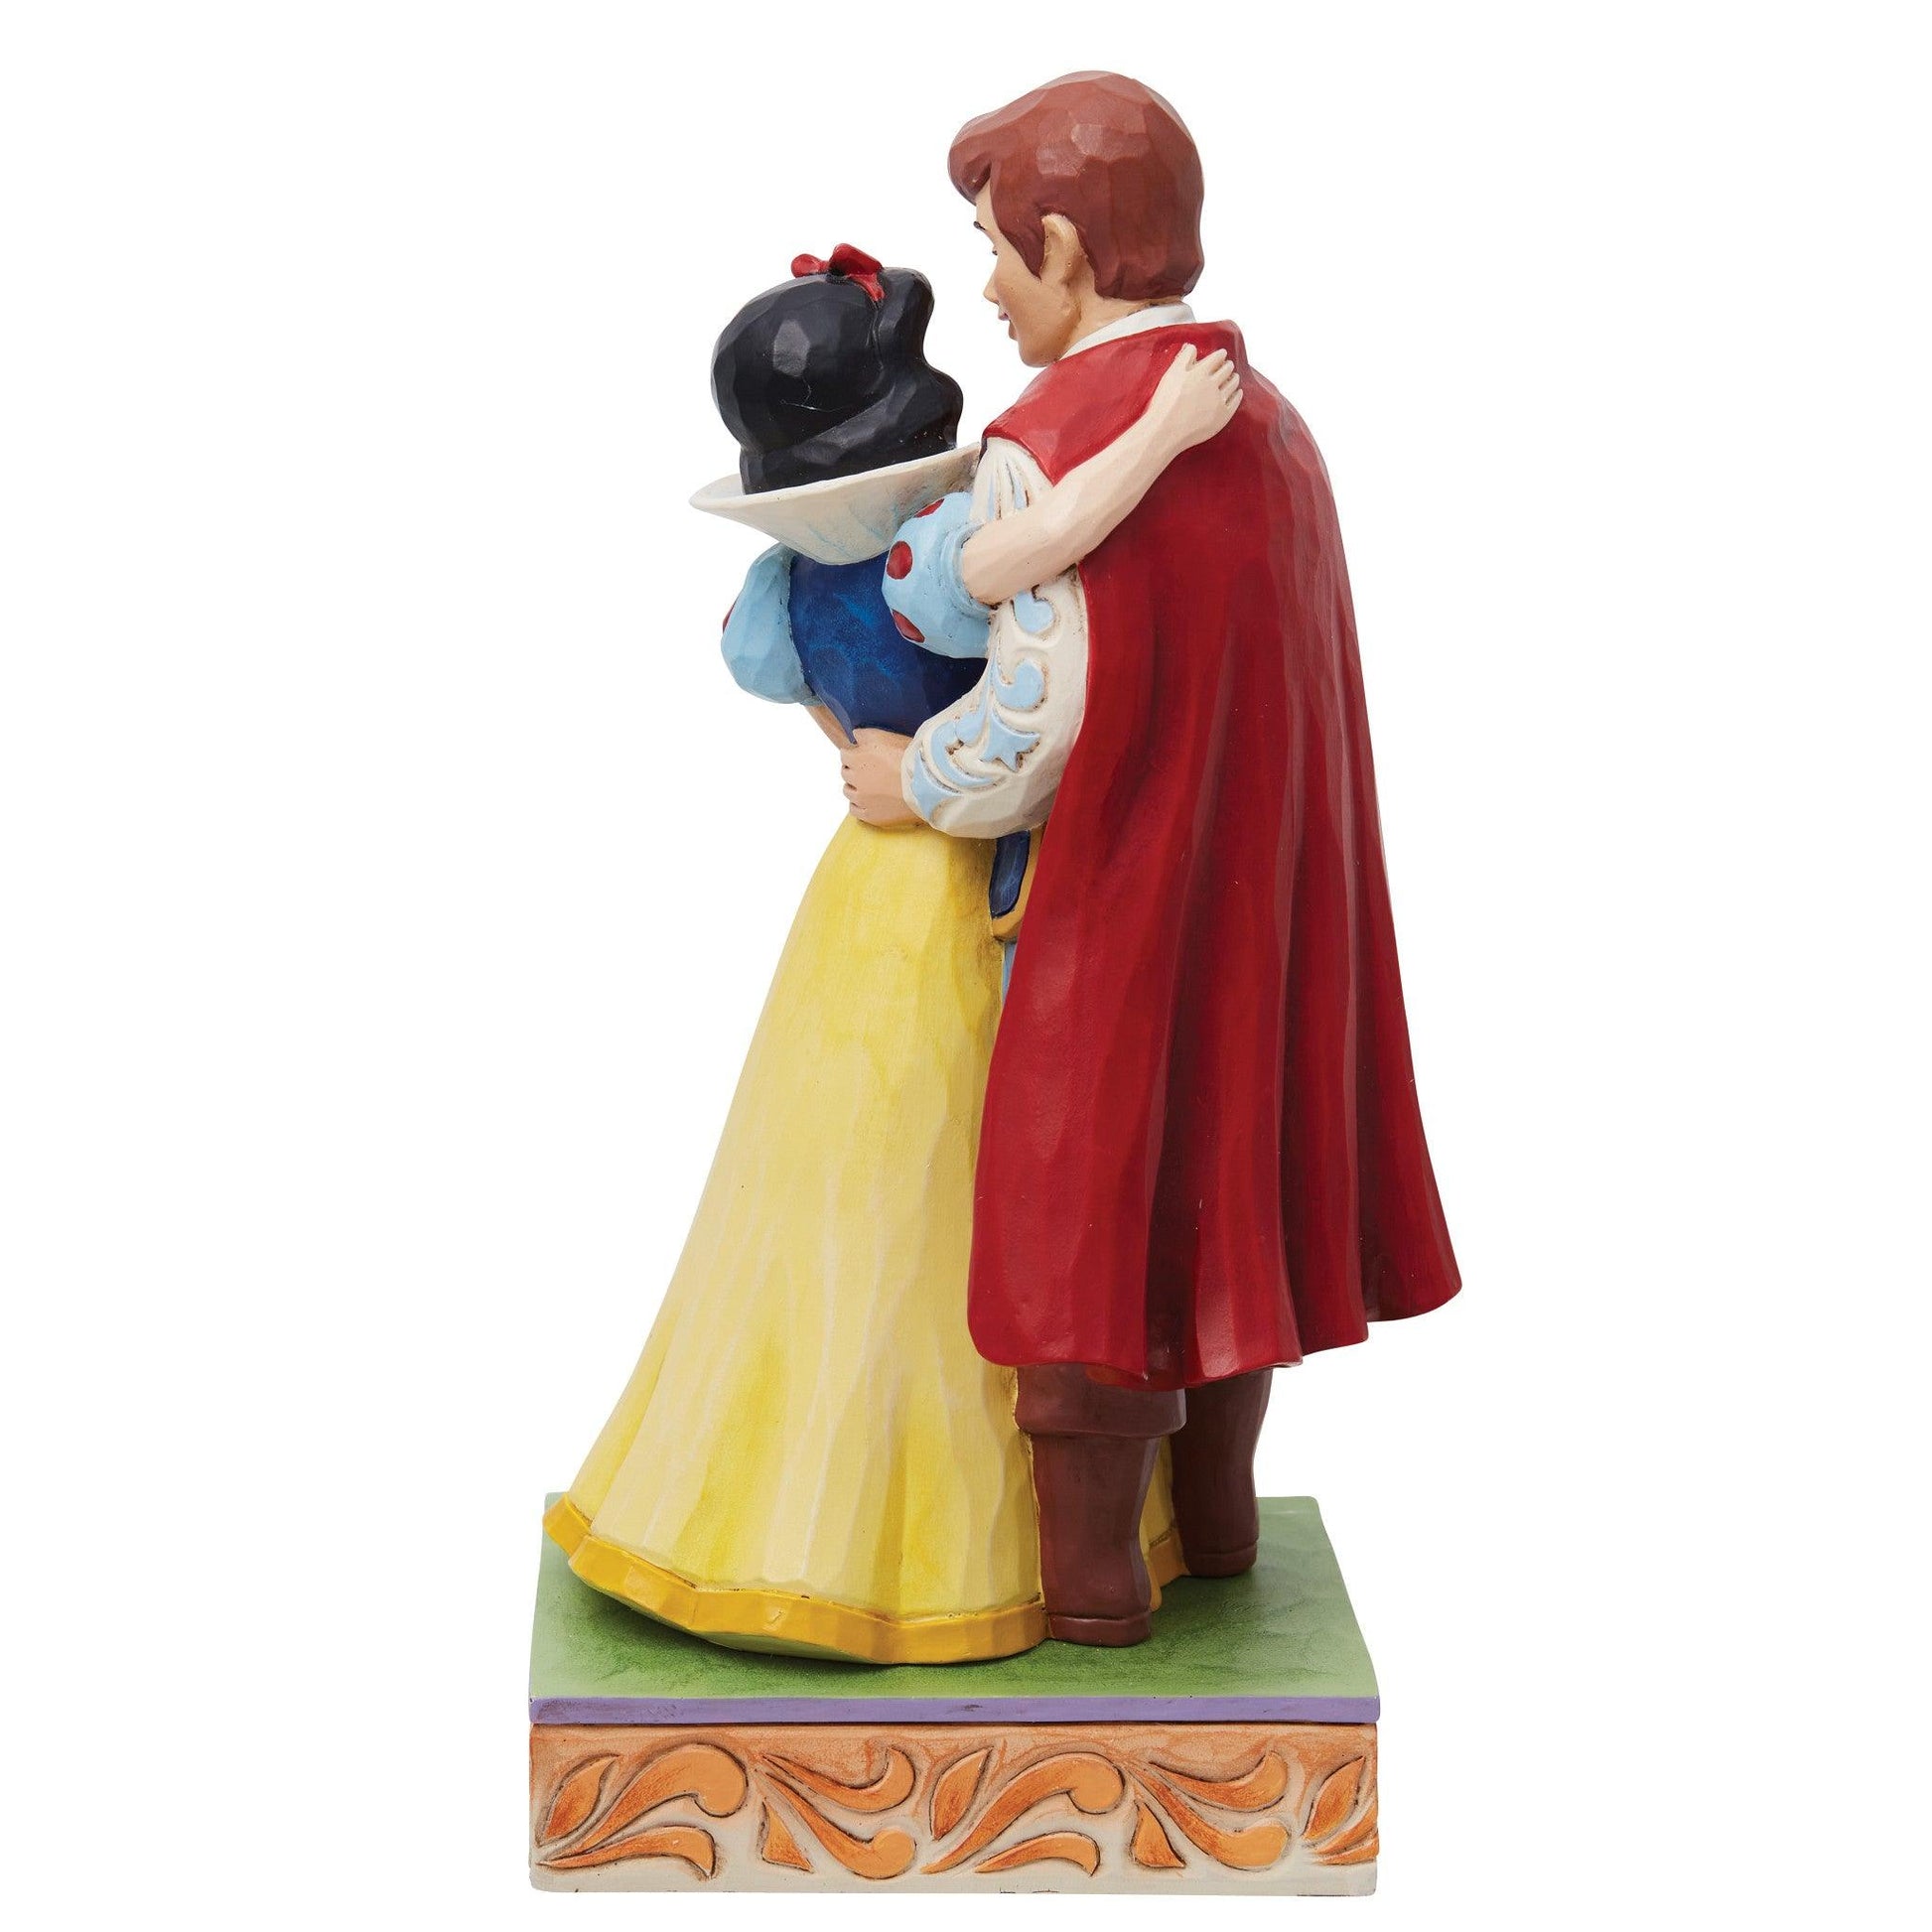 Snow White & Prince Love Figurine - Gallery Gifts Online 